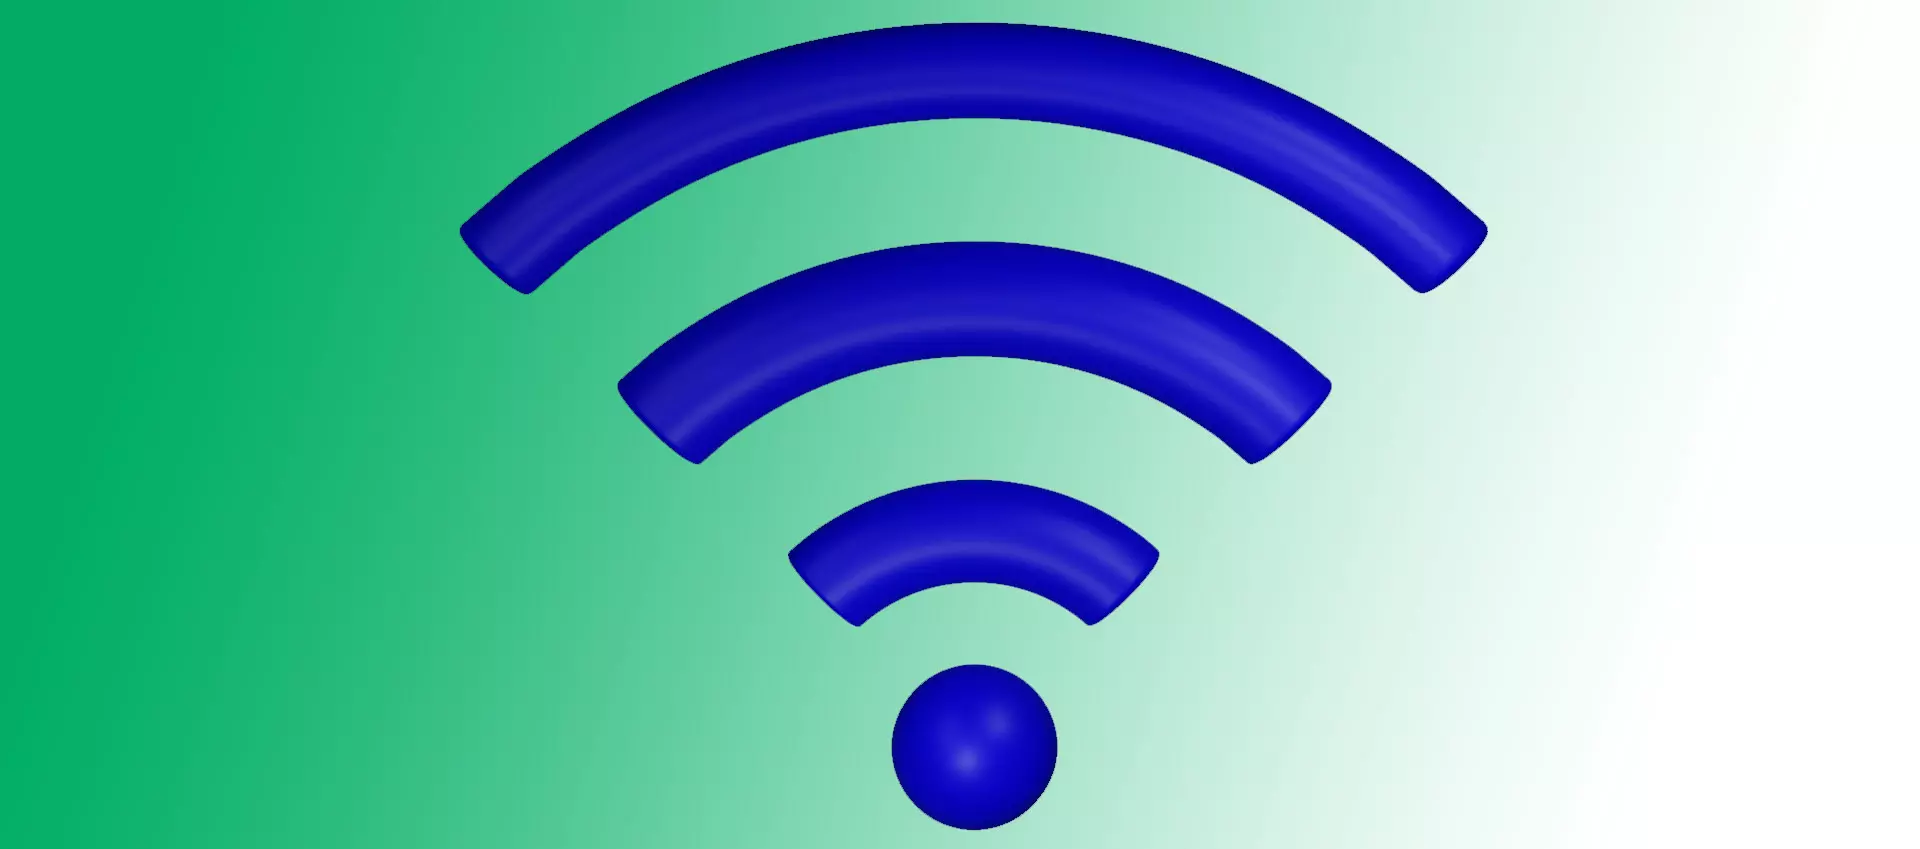 change the name or SSID of the WiFi on the router